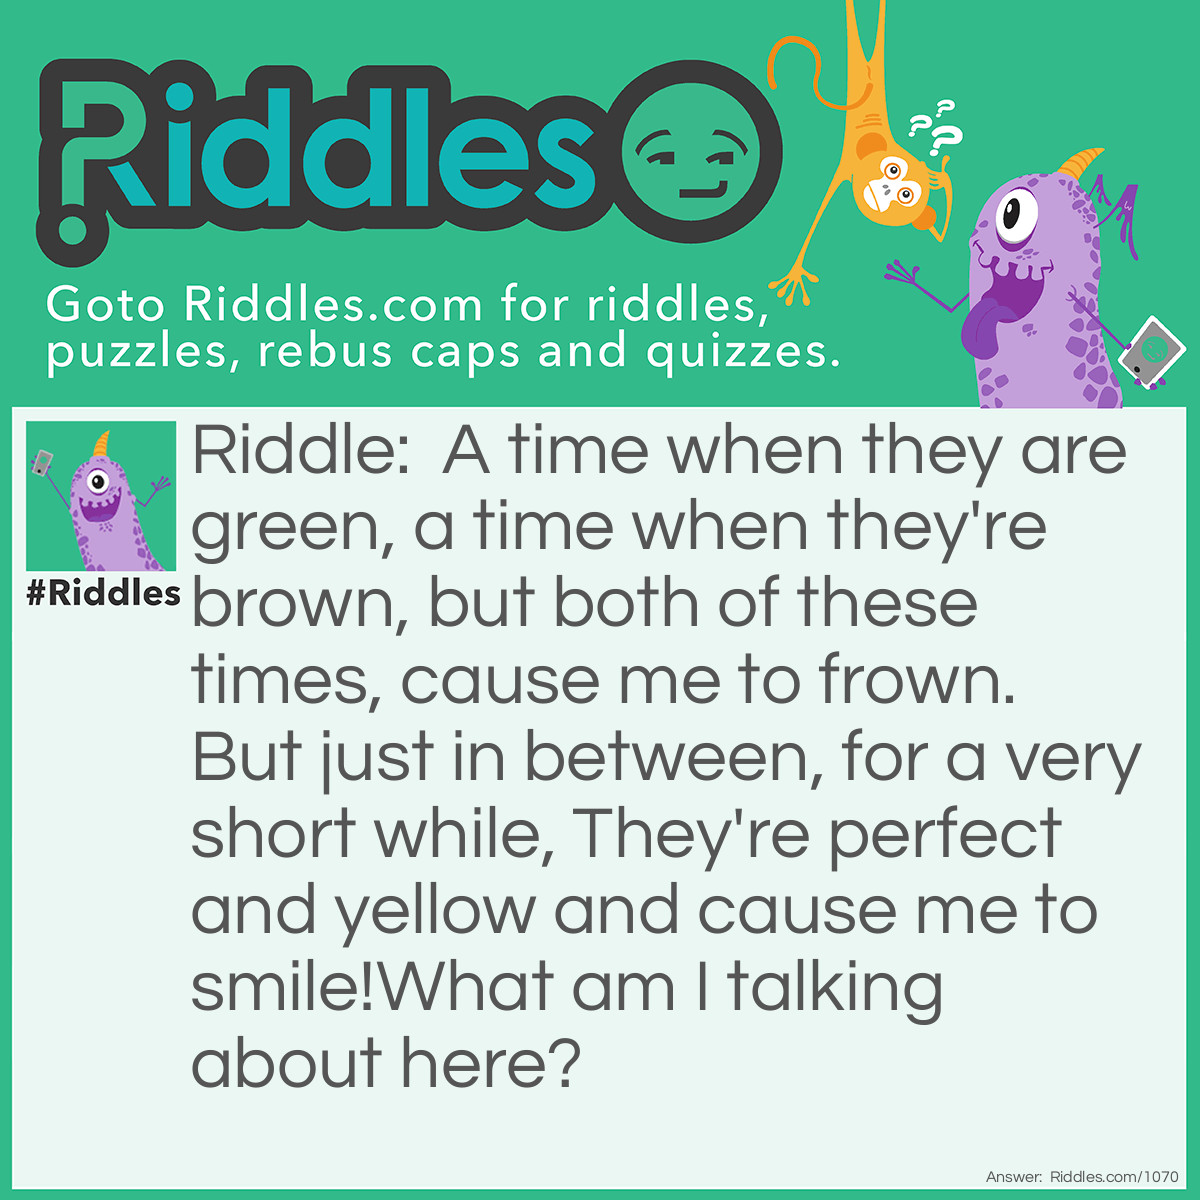 Riddle: A time when they are green, a time when they're brown, but both of these times, cause me to frown. But just in between, for a very <a href="/short-riddles">short</a> while, They're perfect and yellow and cause me to smile!
What am I talking about here? Answer: Bananas.